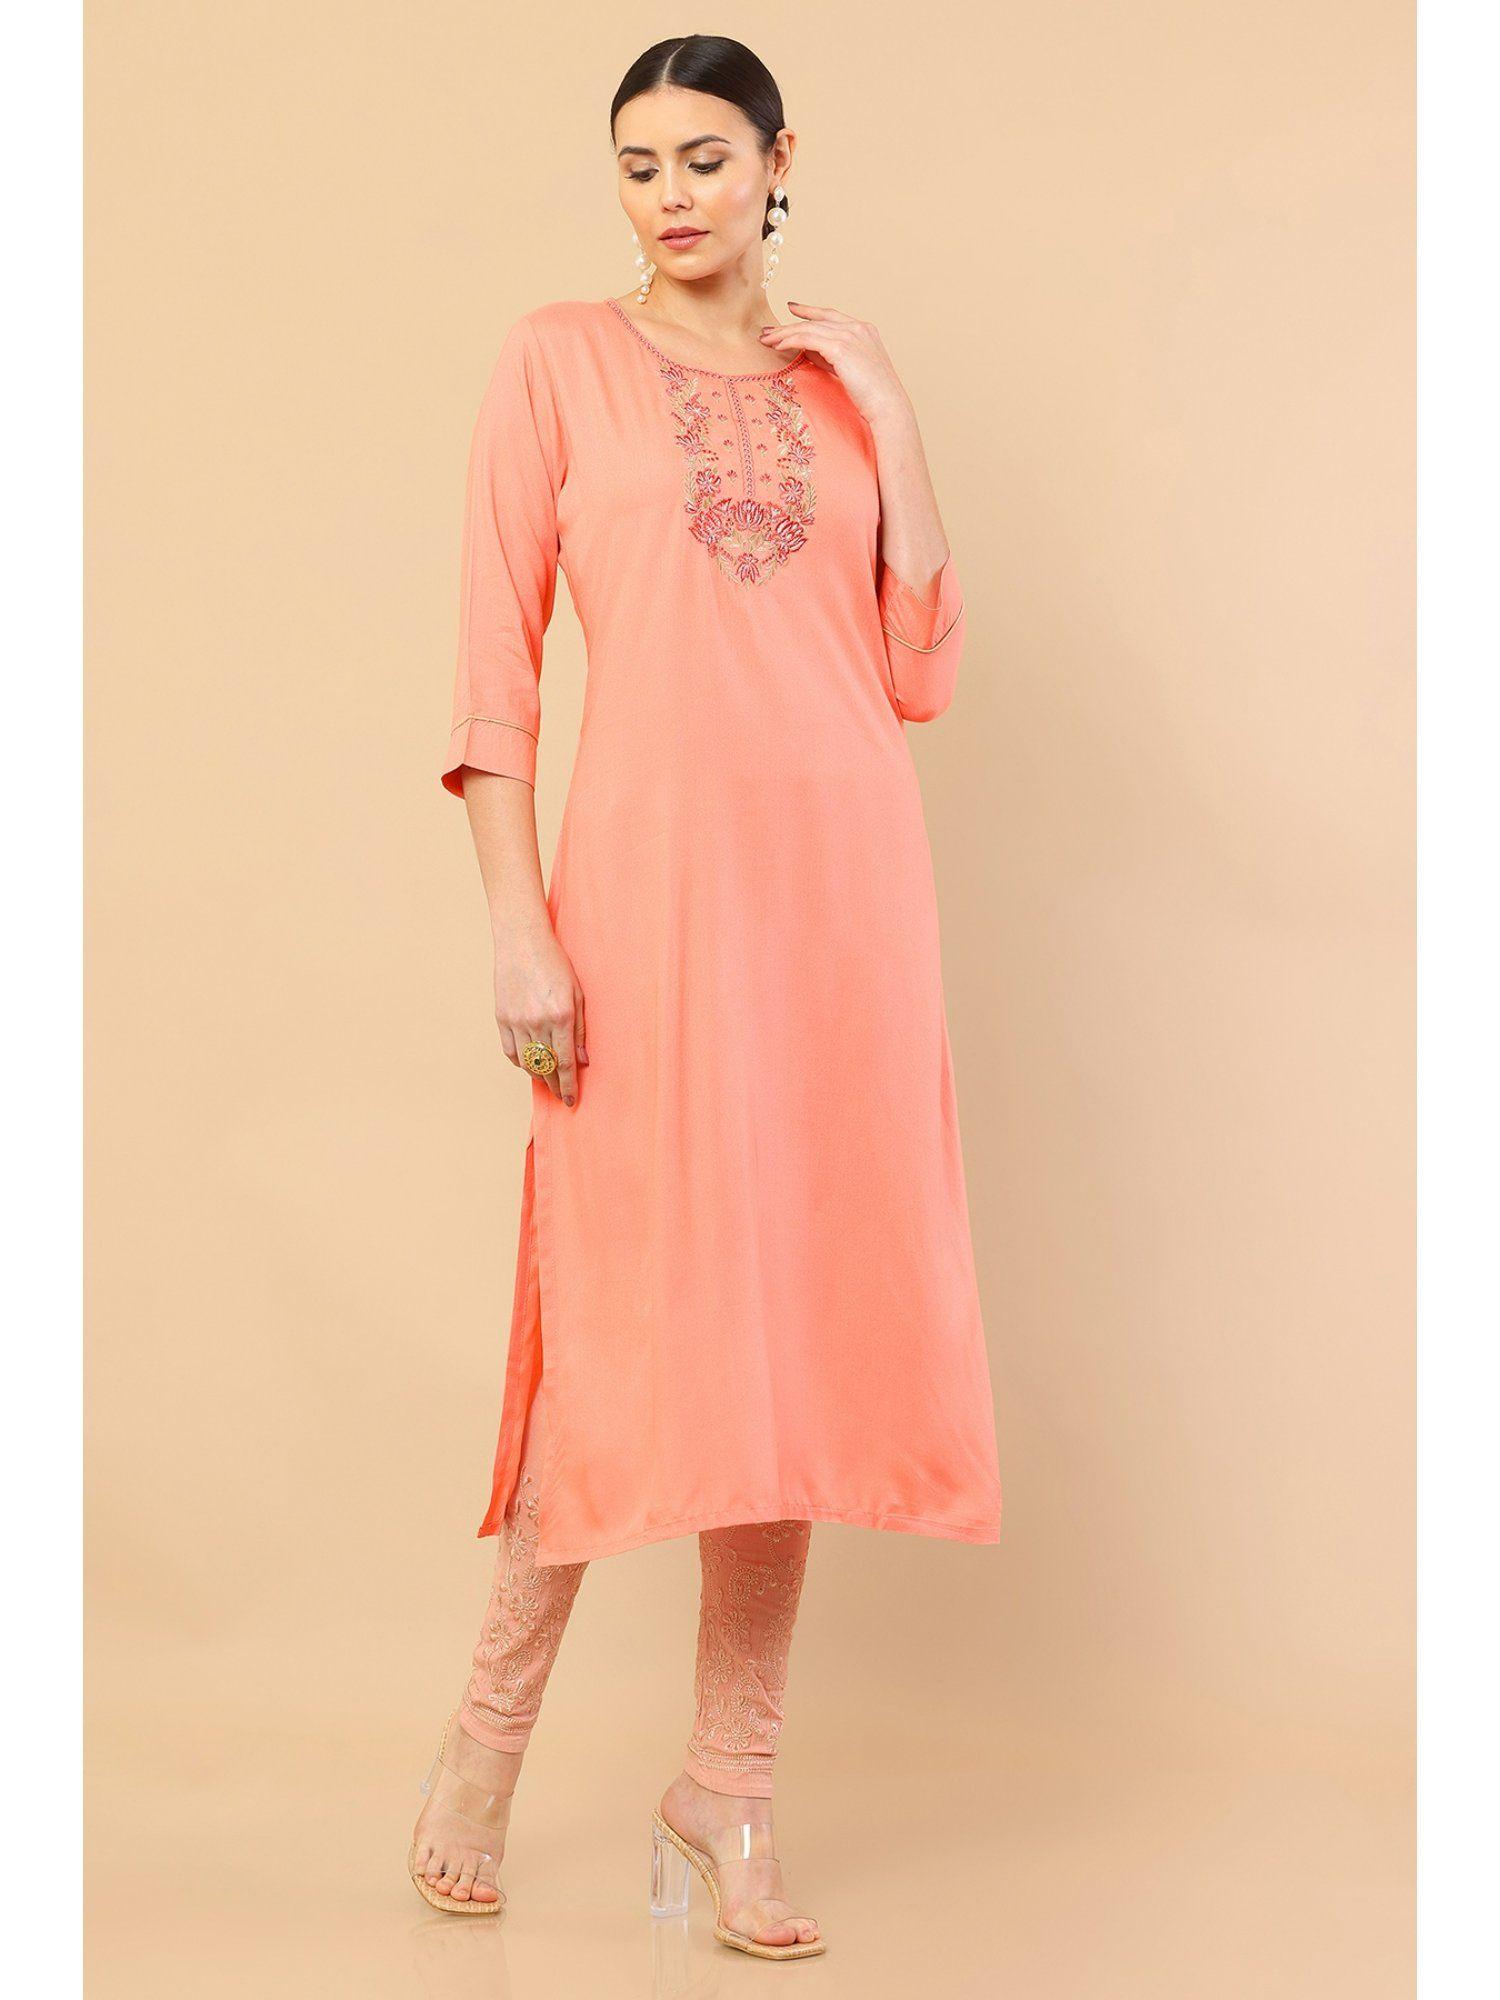 peach rayon kurta with floral embroidered designs